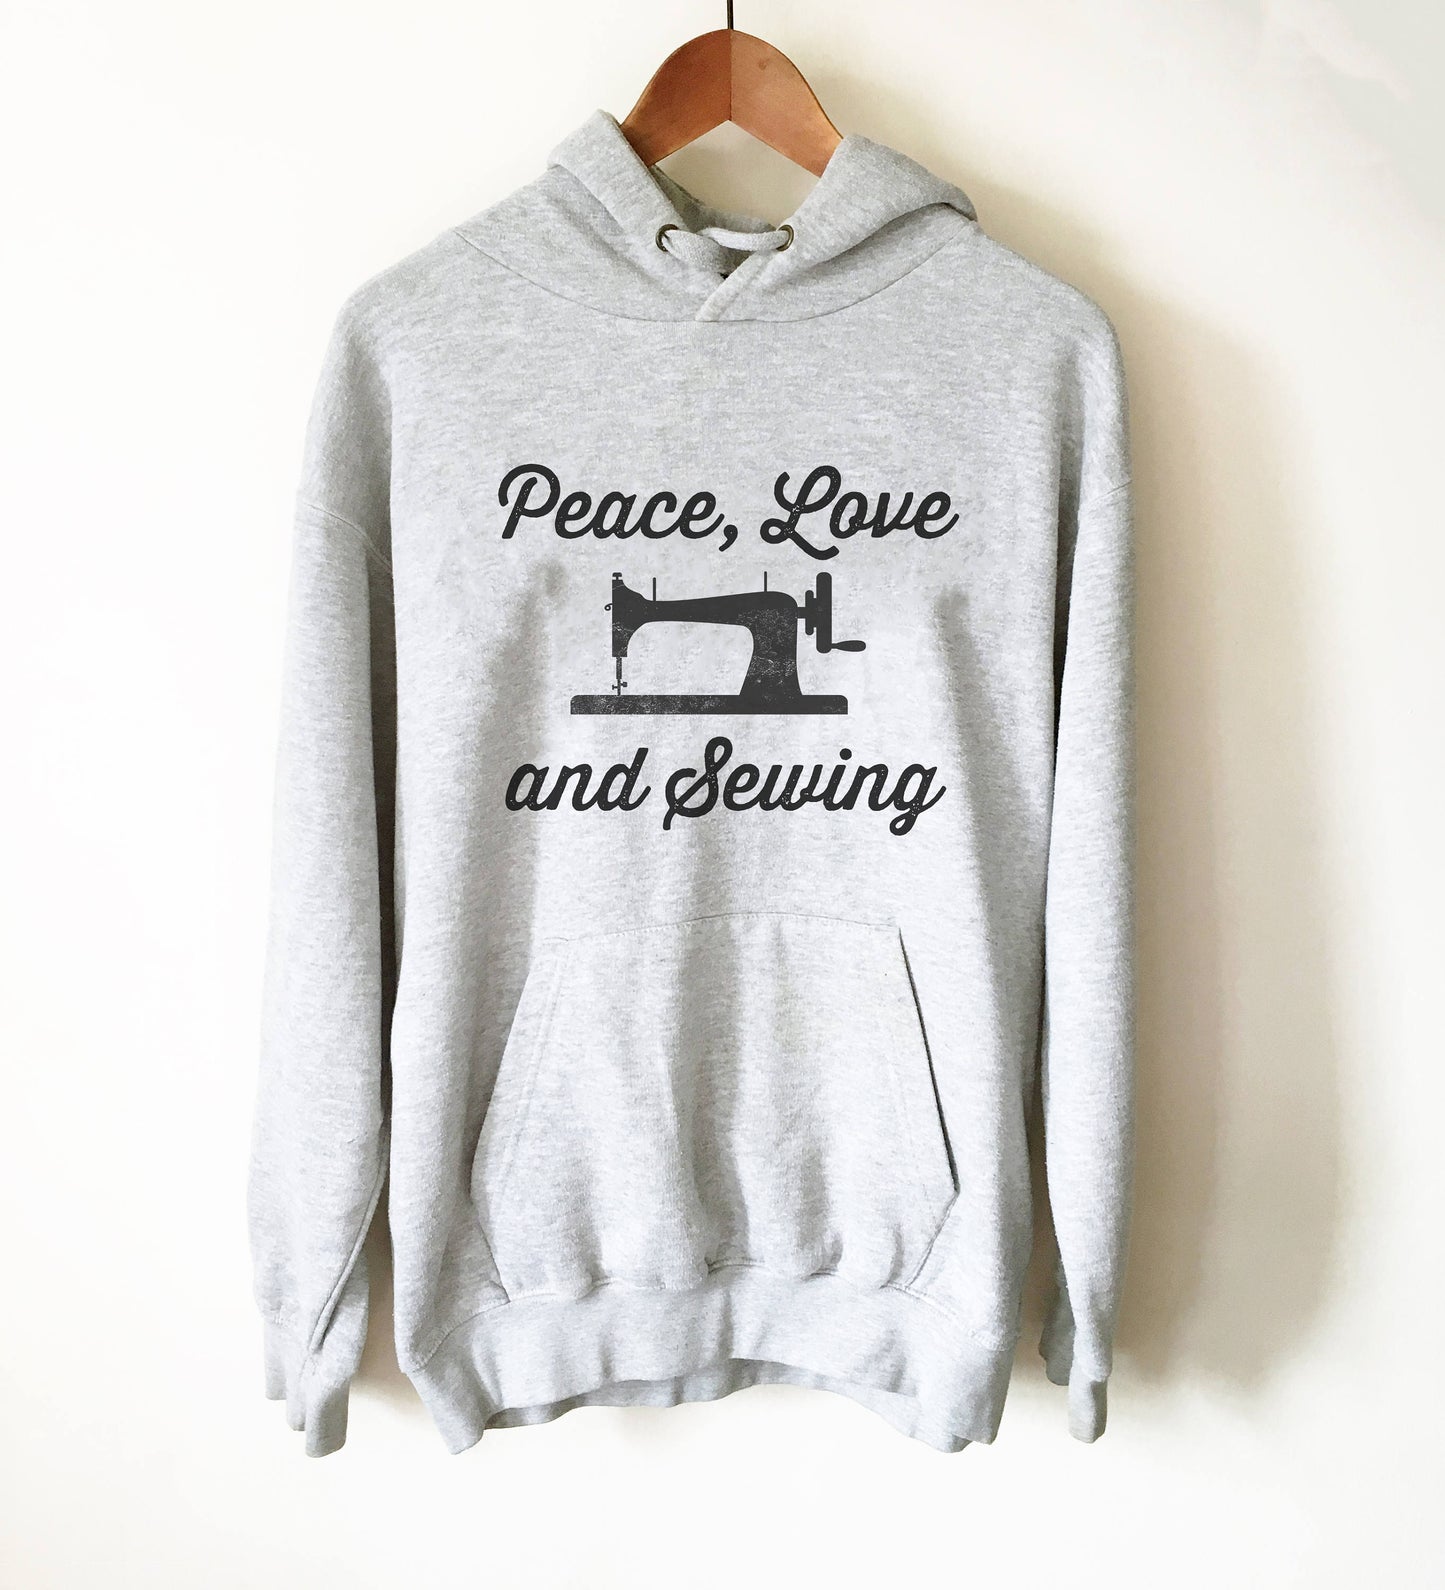 Peace, Love and Sewing Hoodie - Sewing shirt | Quilting shirt | Seamstress shirt | Sewing machine shirt | Sewing gift | Crafting shirt